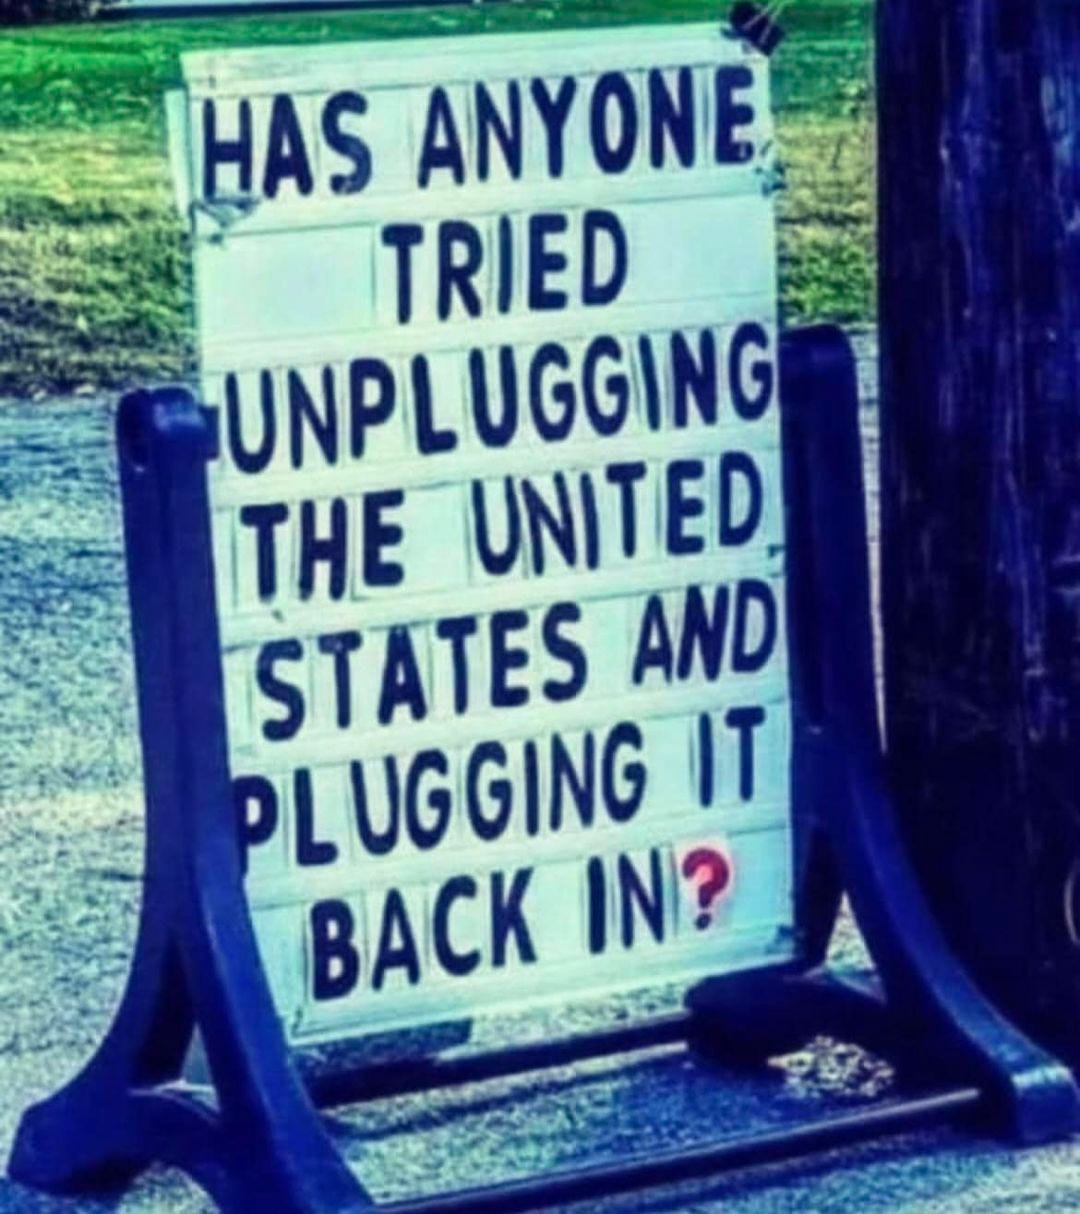 May be an image of phone and text that says 'HAS ANYONE TRIED UNPLUGGING THE UNITED STATES AND PL UGGING IT BACK IN?'